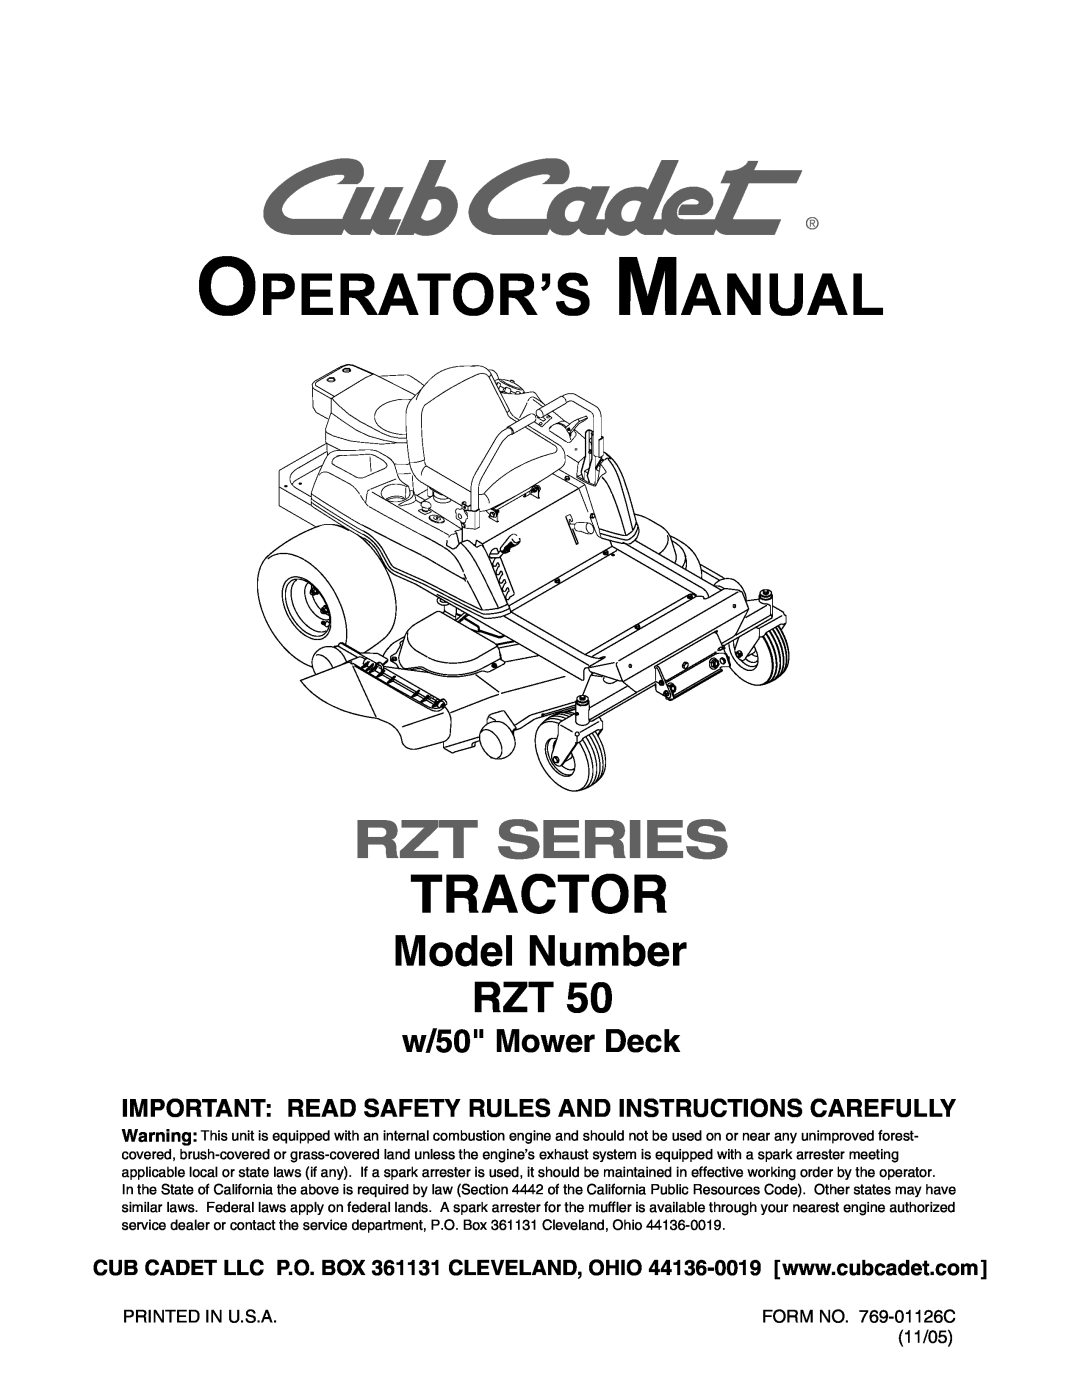 Cub Cadet RZT 50 manual Important Read Safety Rules And Instructions Carefully, Operator’S Manual, Rzt Series, Tractor 